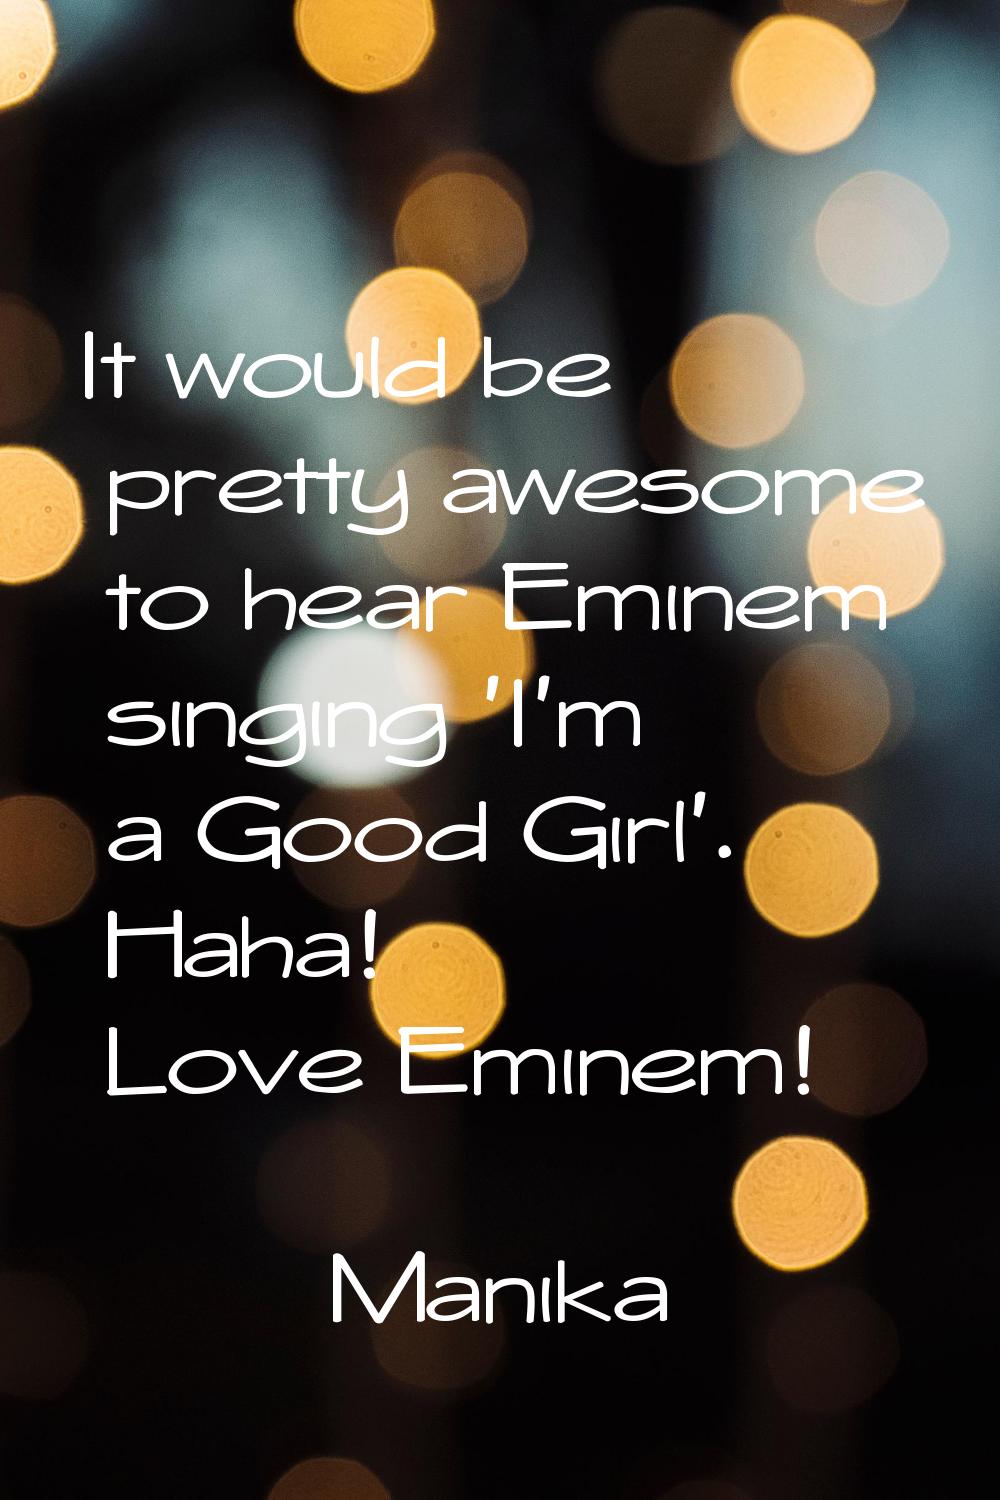 It would be pretty awesome to hear Eminem singing 'I'm a Good Girl'. Haha! Love Eminem!